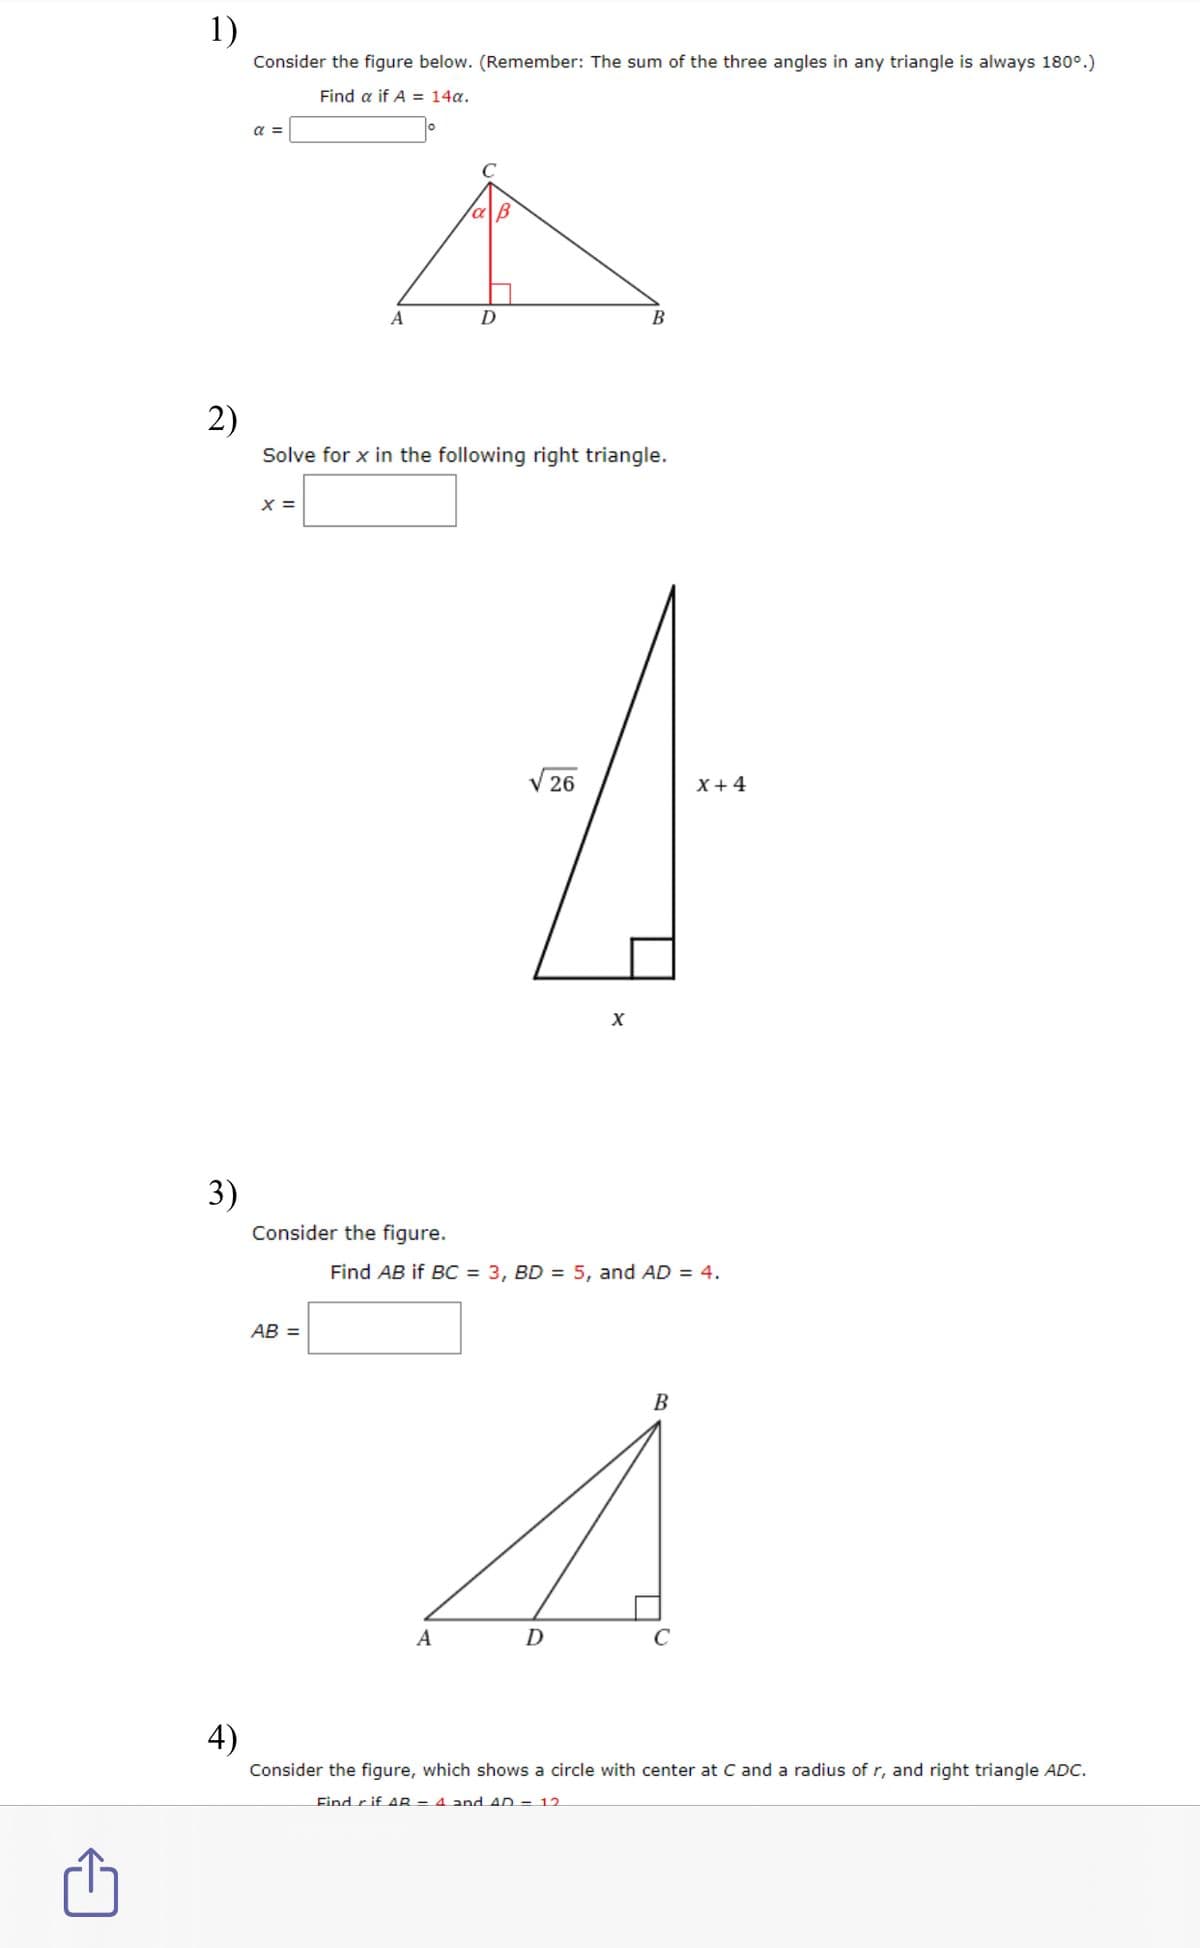 1)
Consider the figure below. (Remember: The sum of the three angles in any triangle is always 180°.)
Find a if A = 14a.
a =
A
D
В
2)
Solve for x in the following right triangle.
X =
V 26
X +4
3)
Consider the figure.
Find AB if BC = 3, BD = 5, and AD = 4.
AB =
B
A
D
4)
Consider the figure, which shows a circle with center at C and a radius of r, and right triangle ADC.
Find r if AR = 4. and AD = 12.
